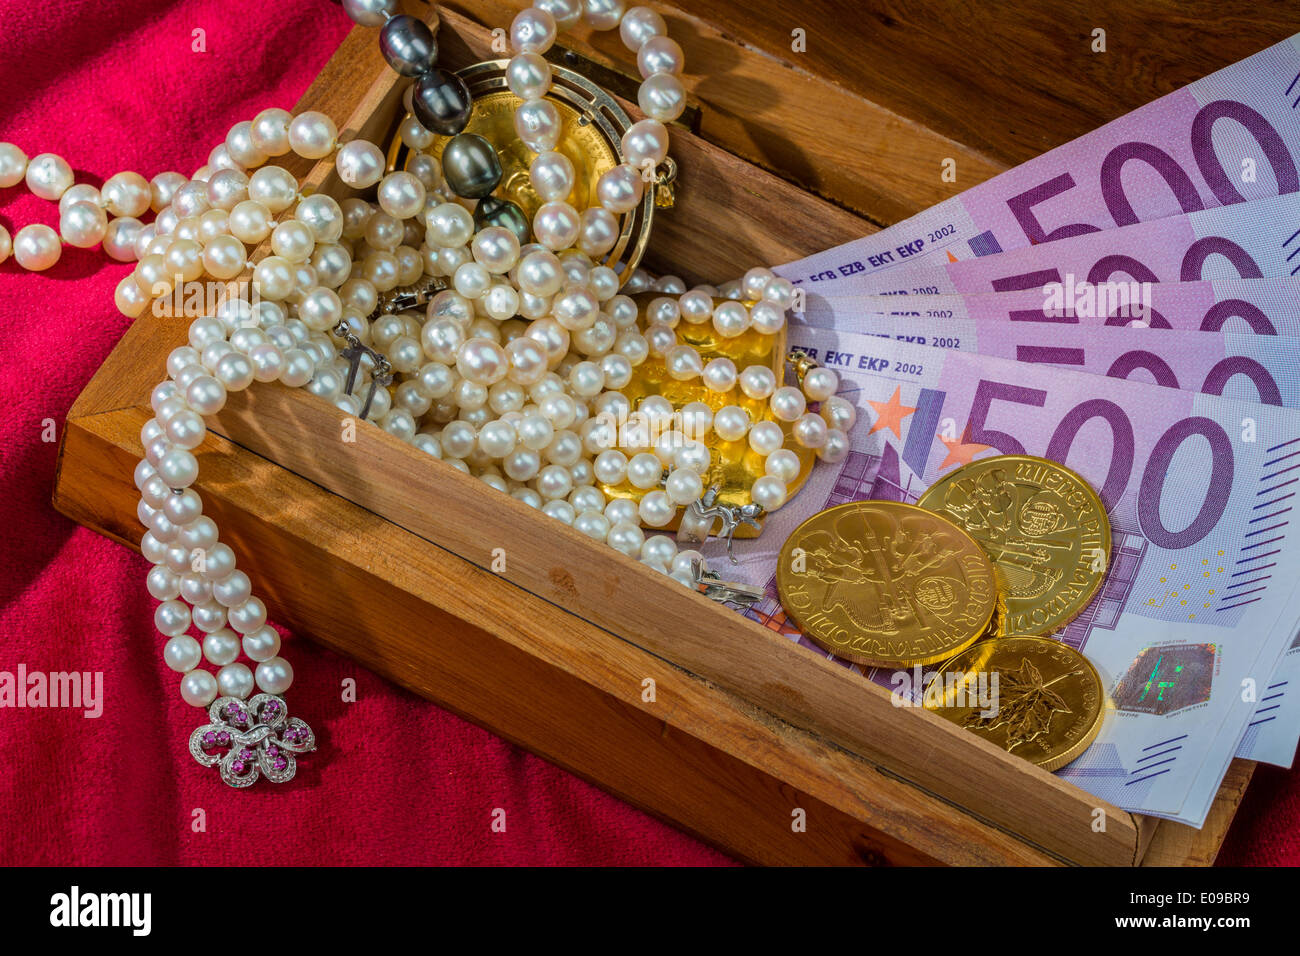 Gold in coins and ingots with jewellery on red velvet. Symbolic photo fue wealth, luxury, Imperial-expensive., Gold in Muenzen u Stock Photo